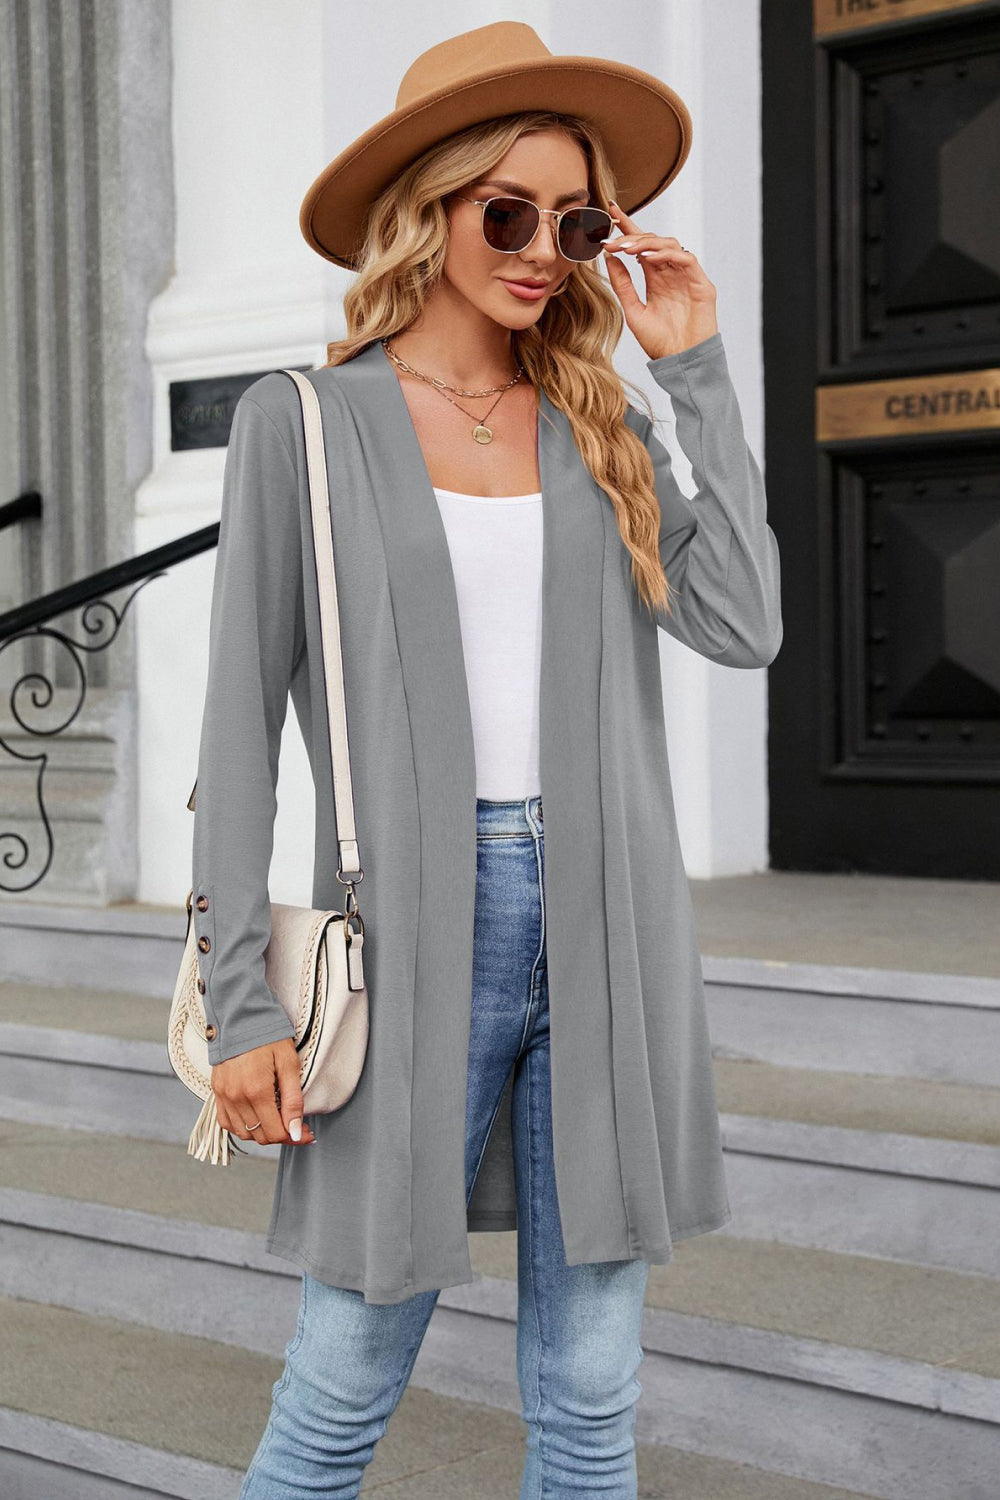 Long Sleeve Open Front Cardigan - Light Gray / S - Women’s Clothing & Accessories - Shirts & Tops - 10 - 2024